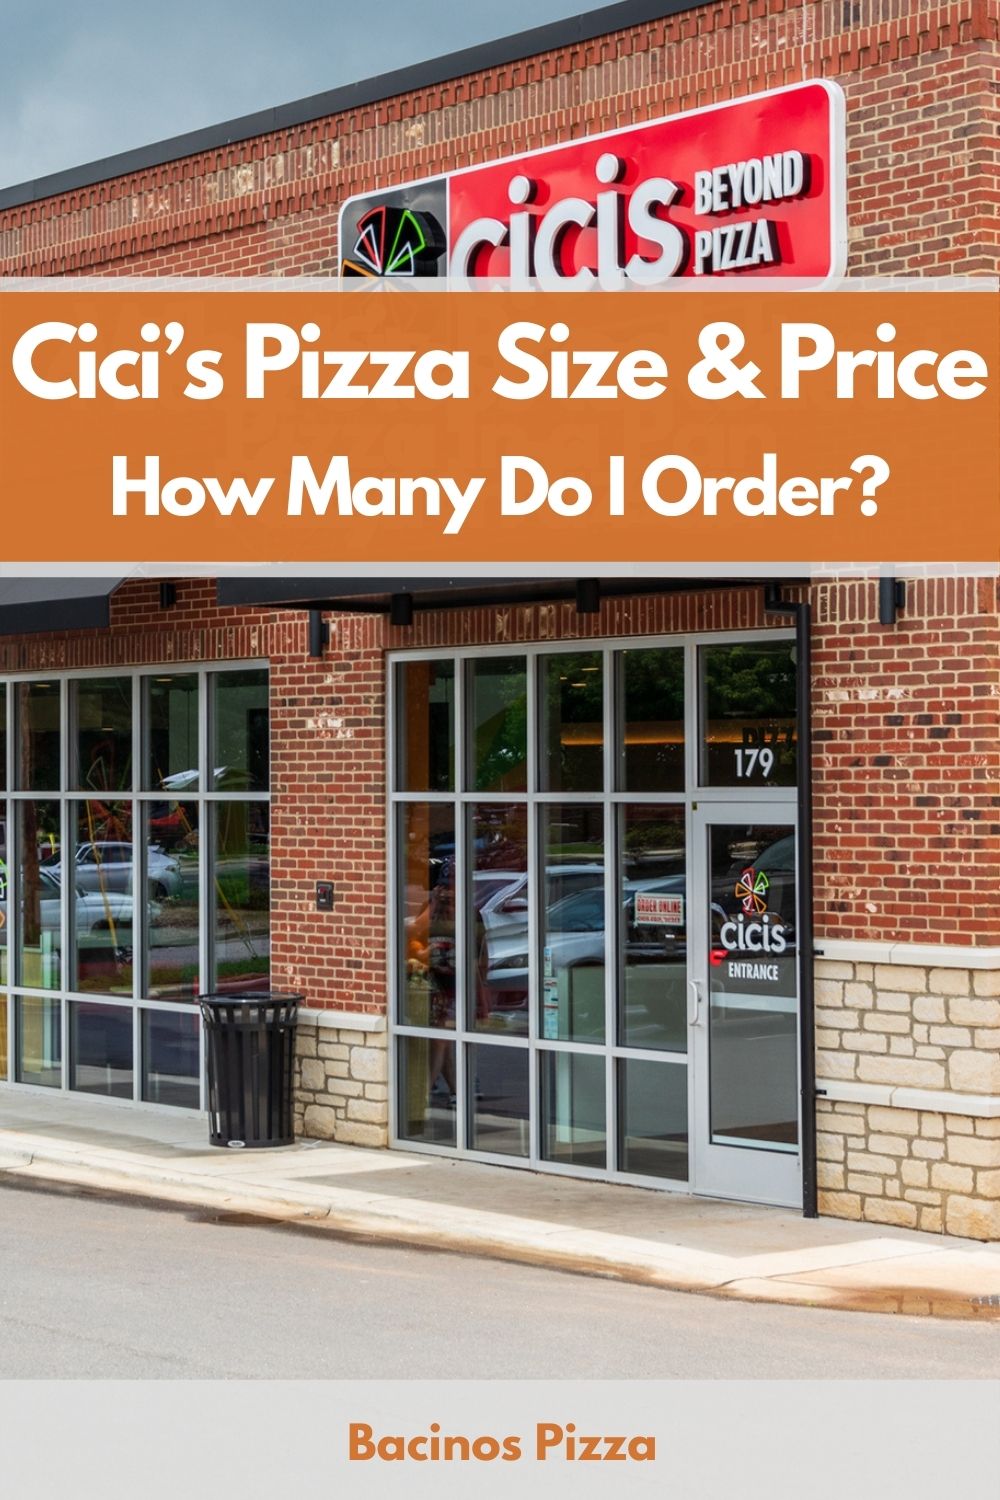 Cici’s Pizza Size & Price How Many Do I Order pin